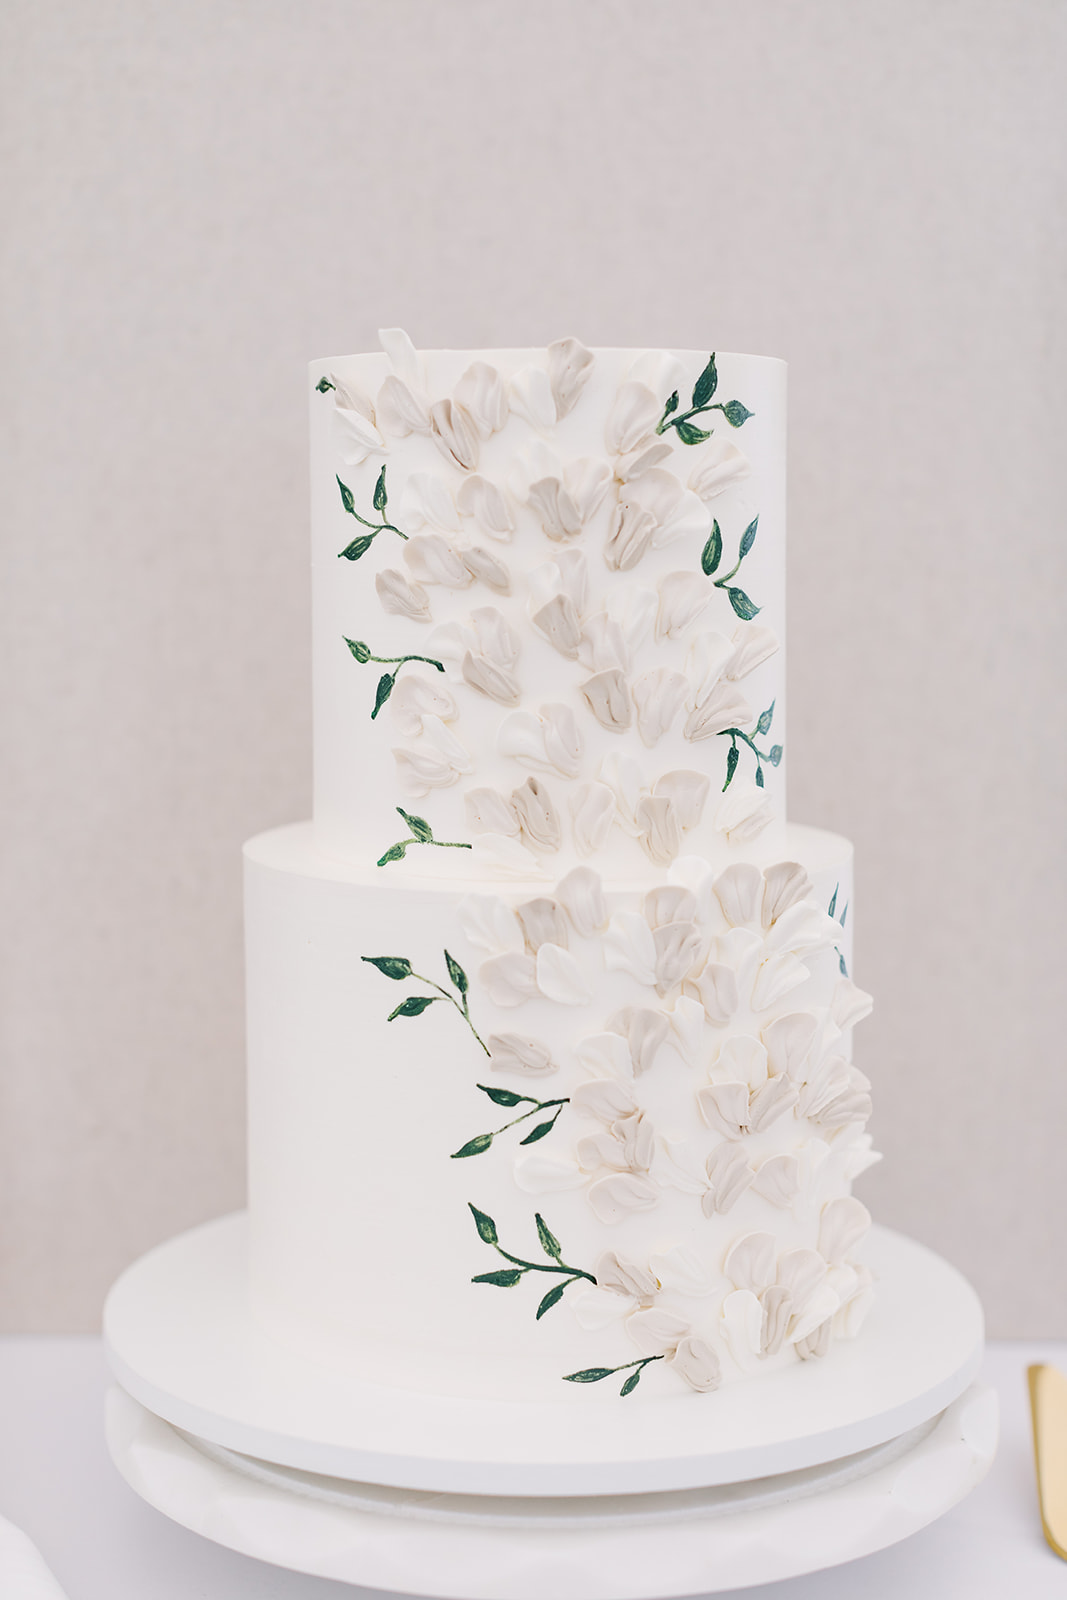 custom floral cake with neutral and greenery accents